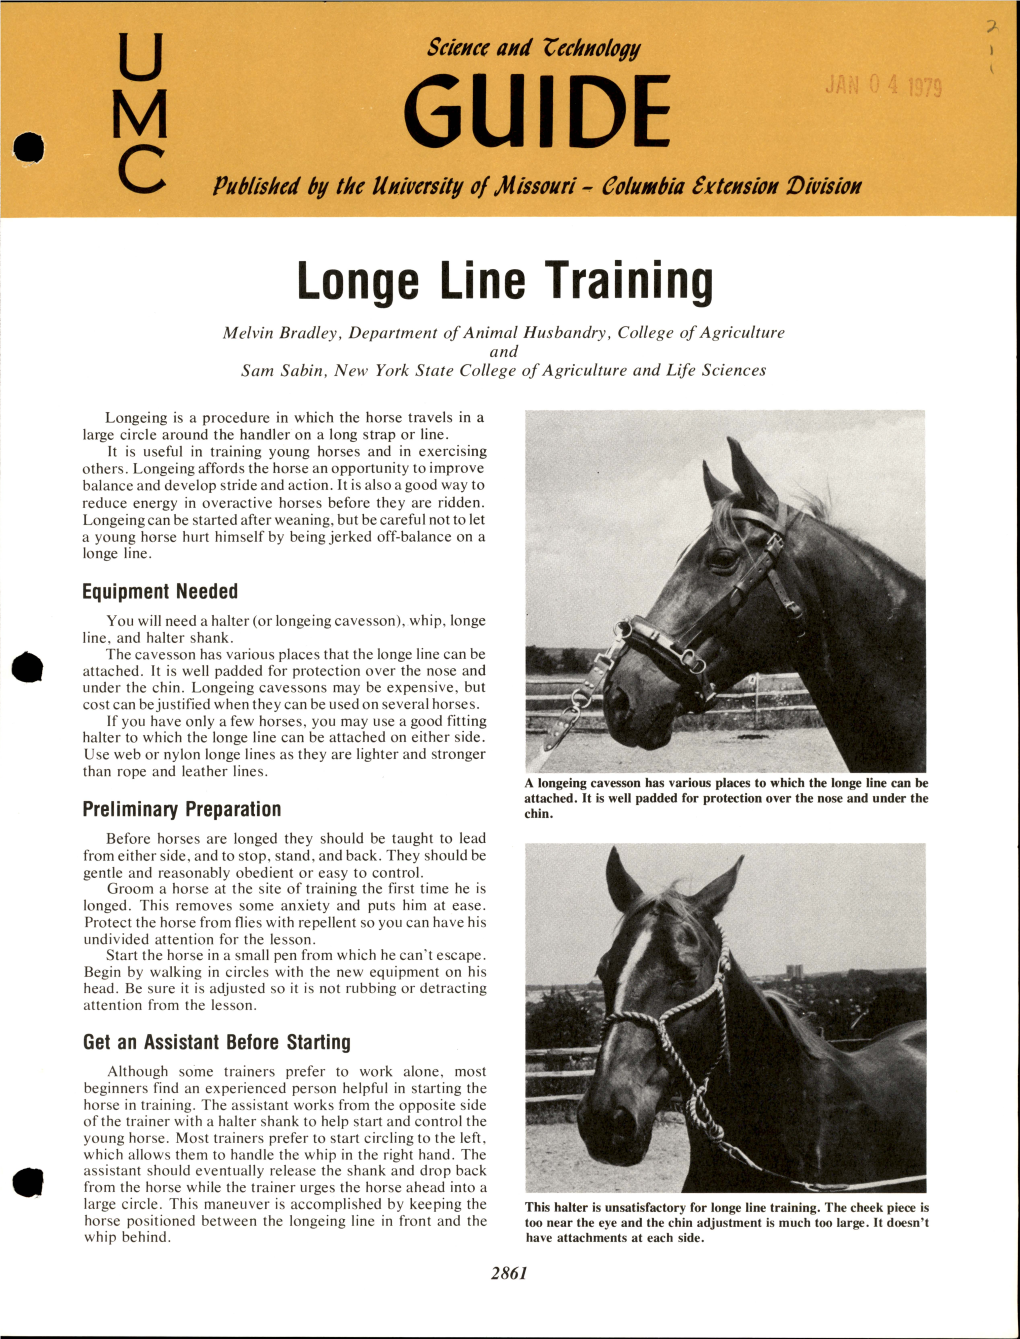 Longe Line Training Melvin Bradley, Department of Animal Husbandry, College of Agriculture and Sam Sabin, New York State College of Agriculture and Life Sciences